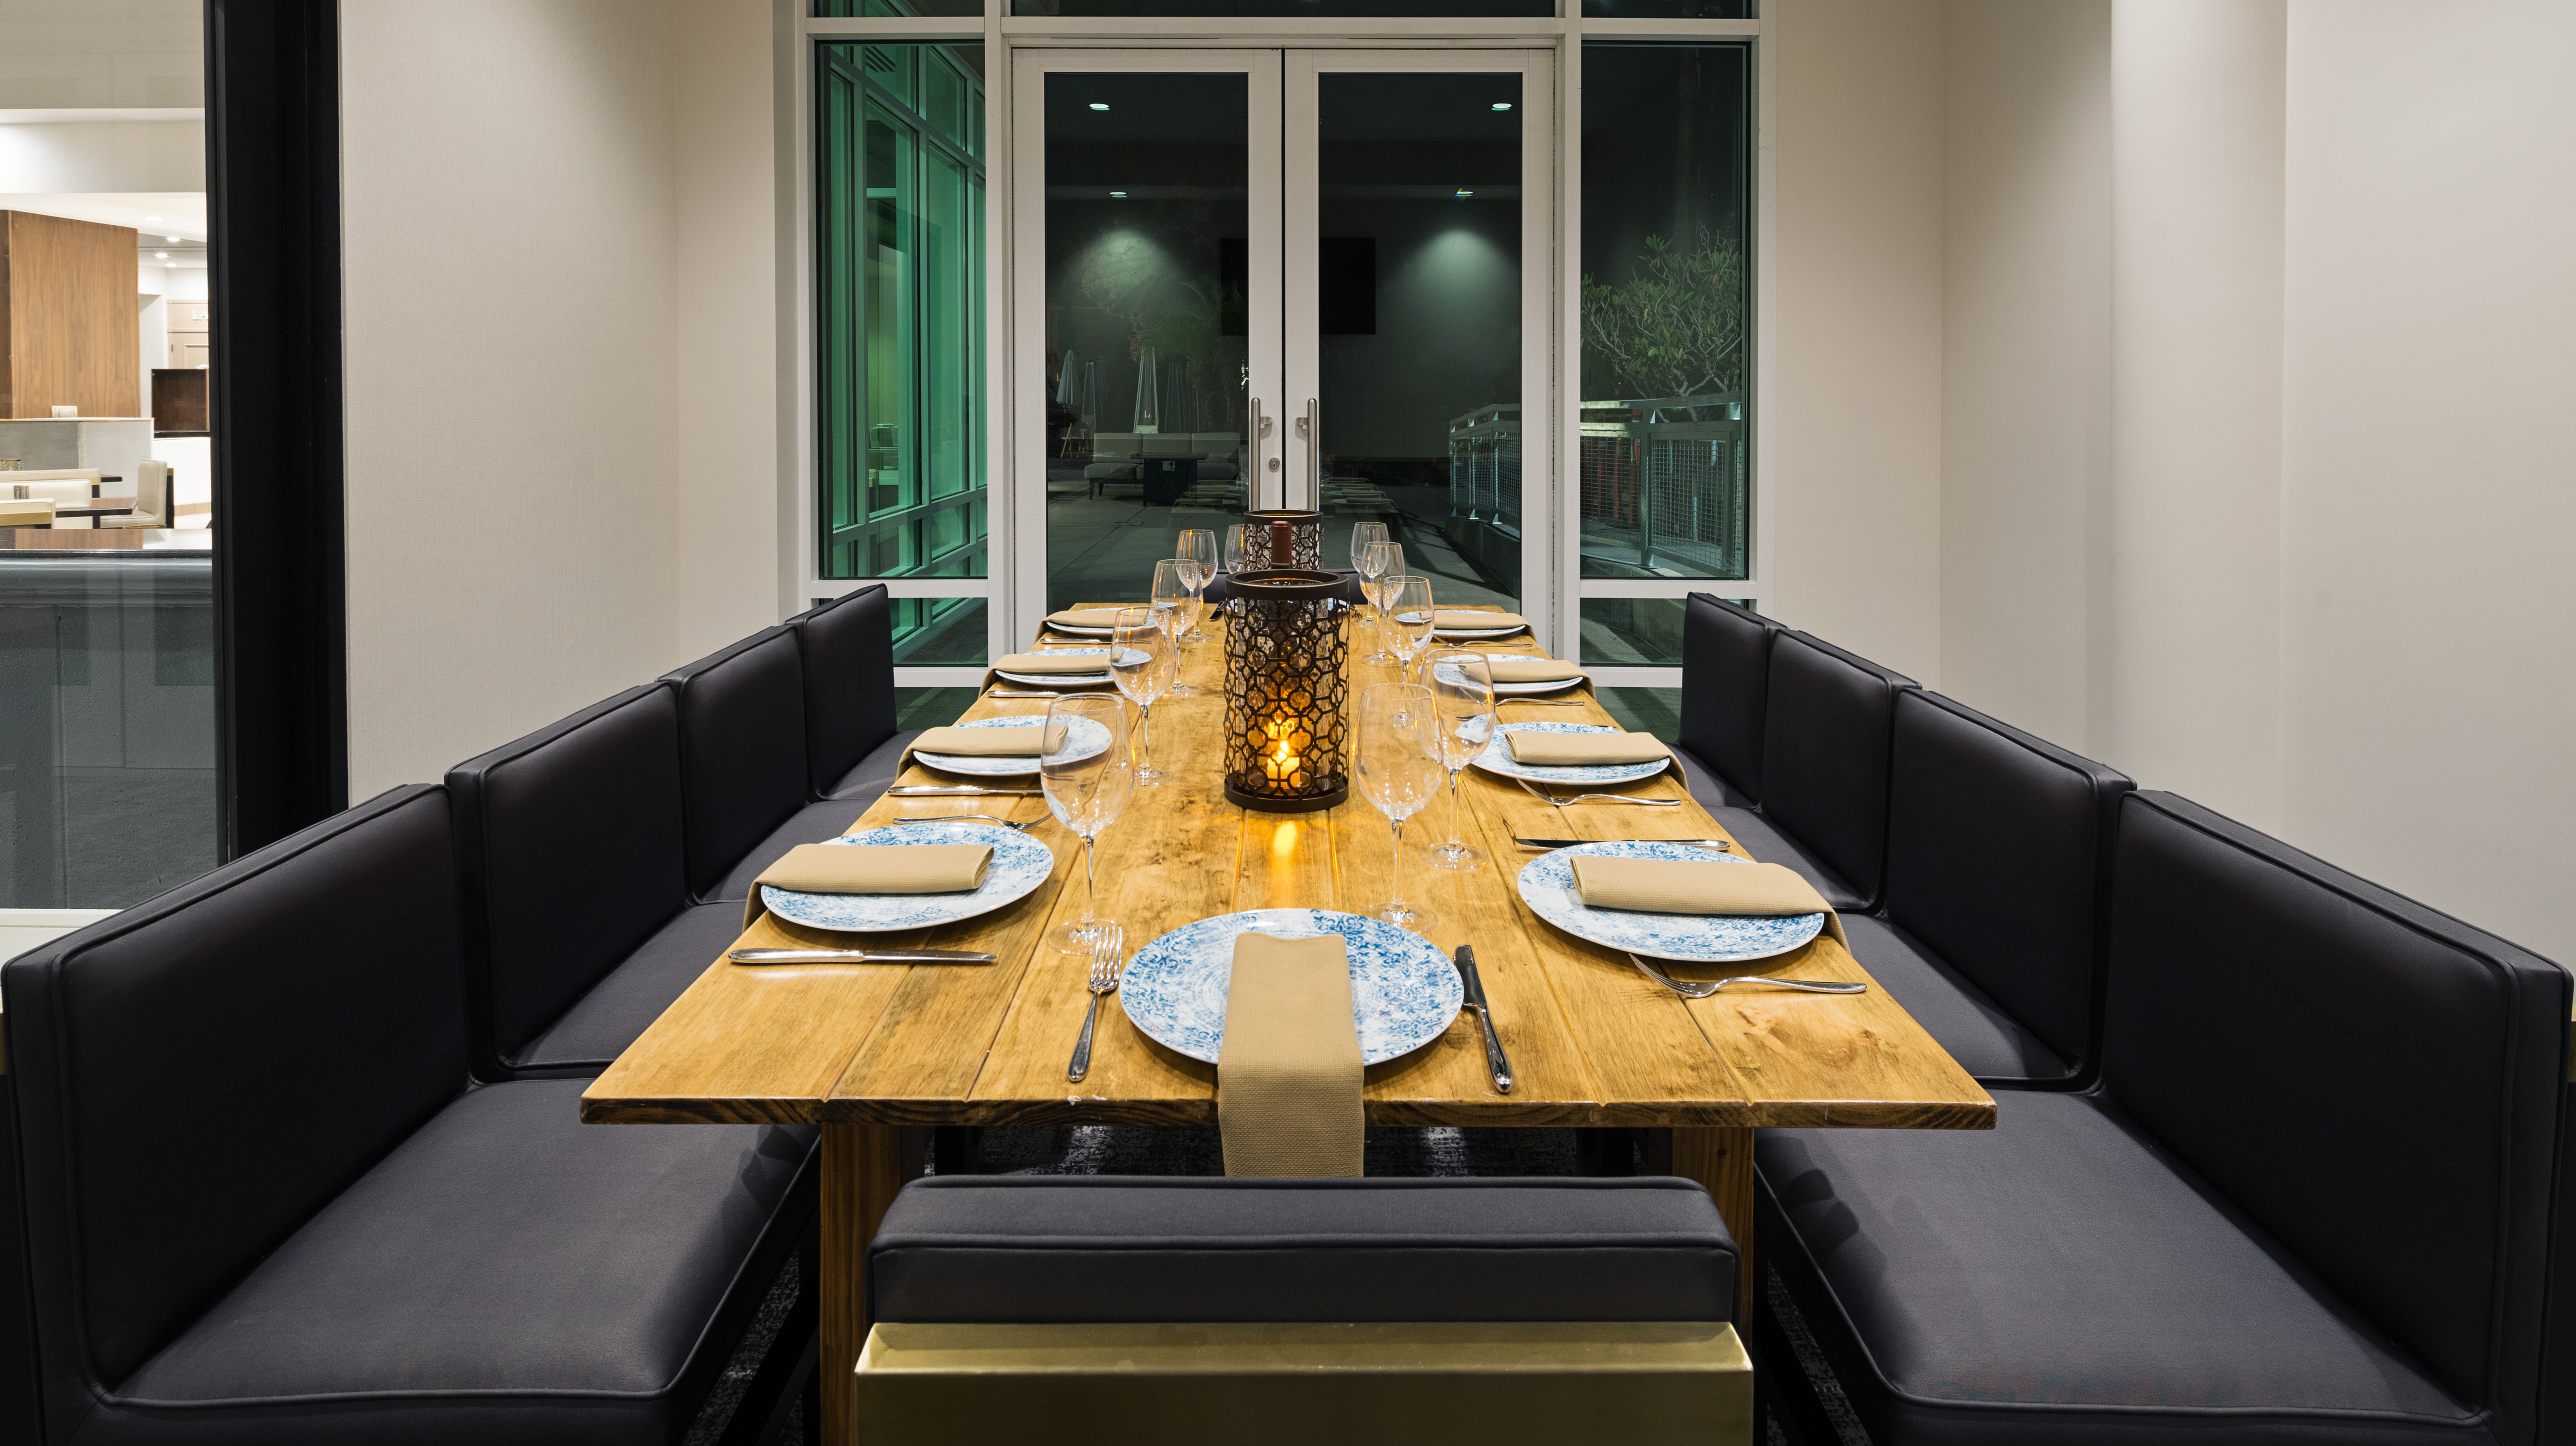 Private Dining Room with Dining Table and Soft Chairs